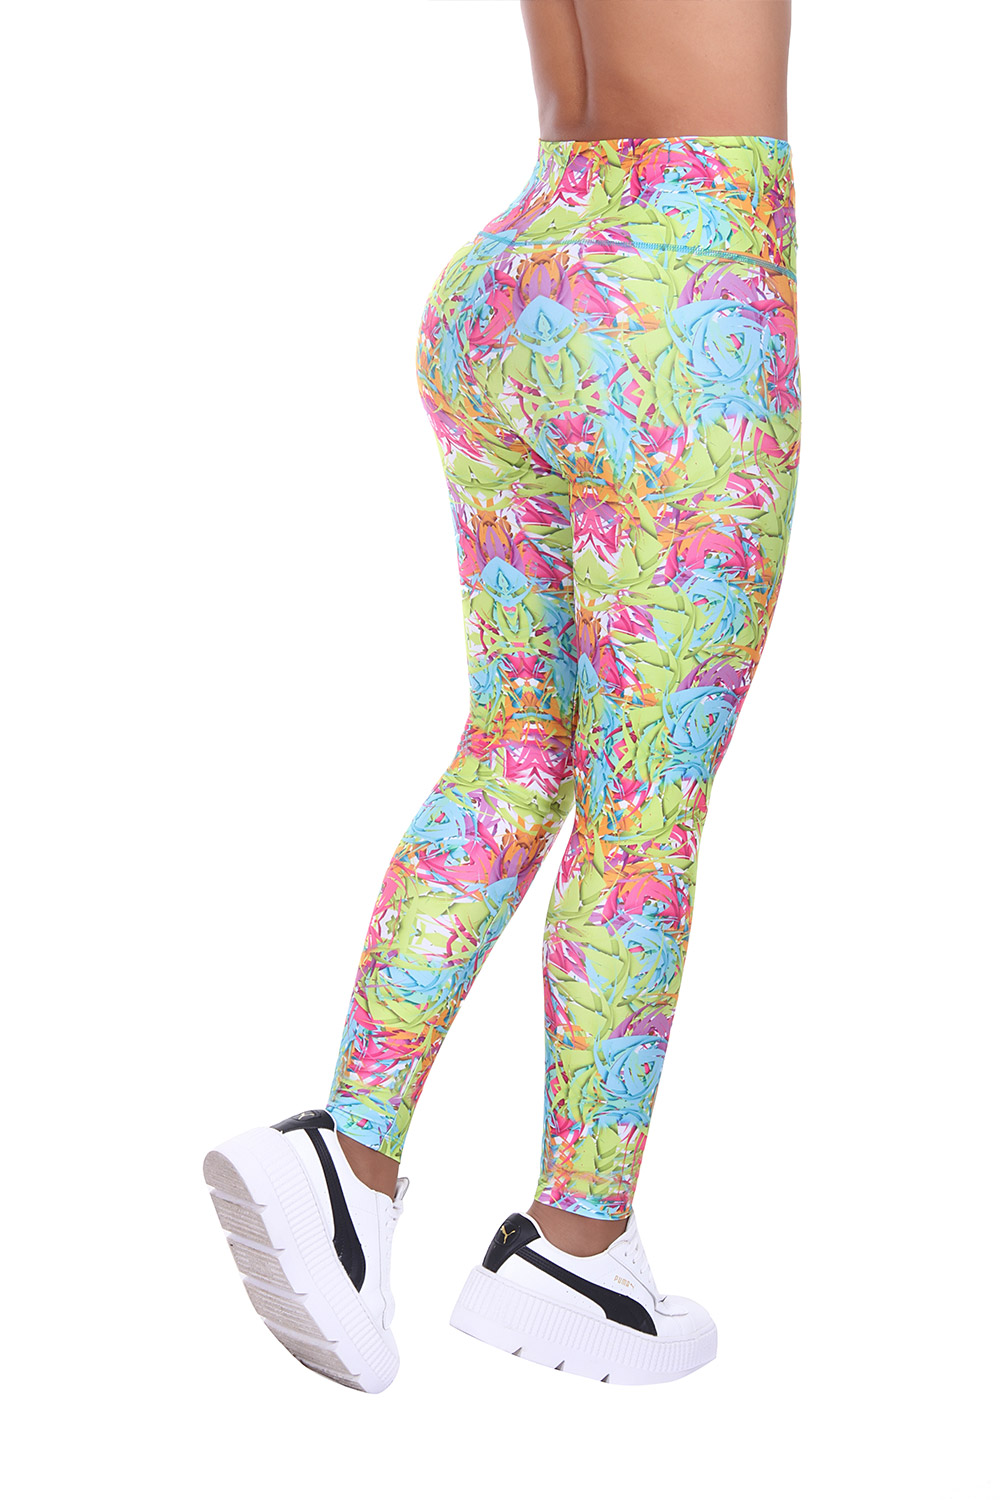 Women’s Black and Hot Pink, Printed Leggings with Slim and Tone Control by Bon Bon – Up